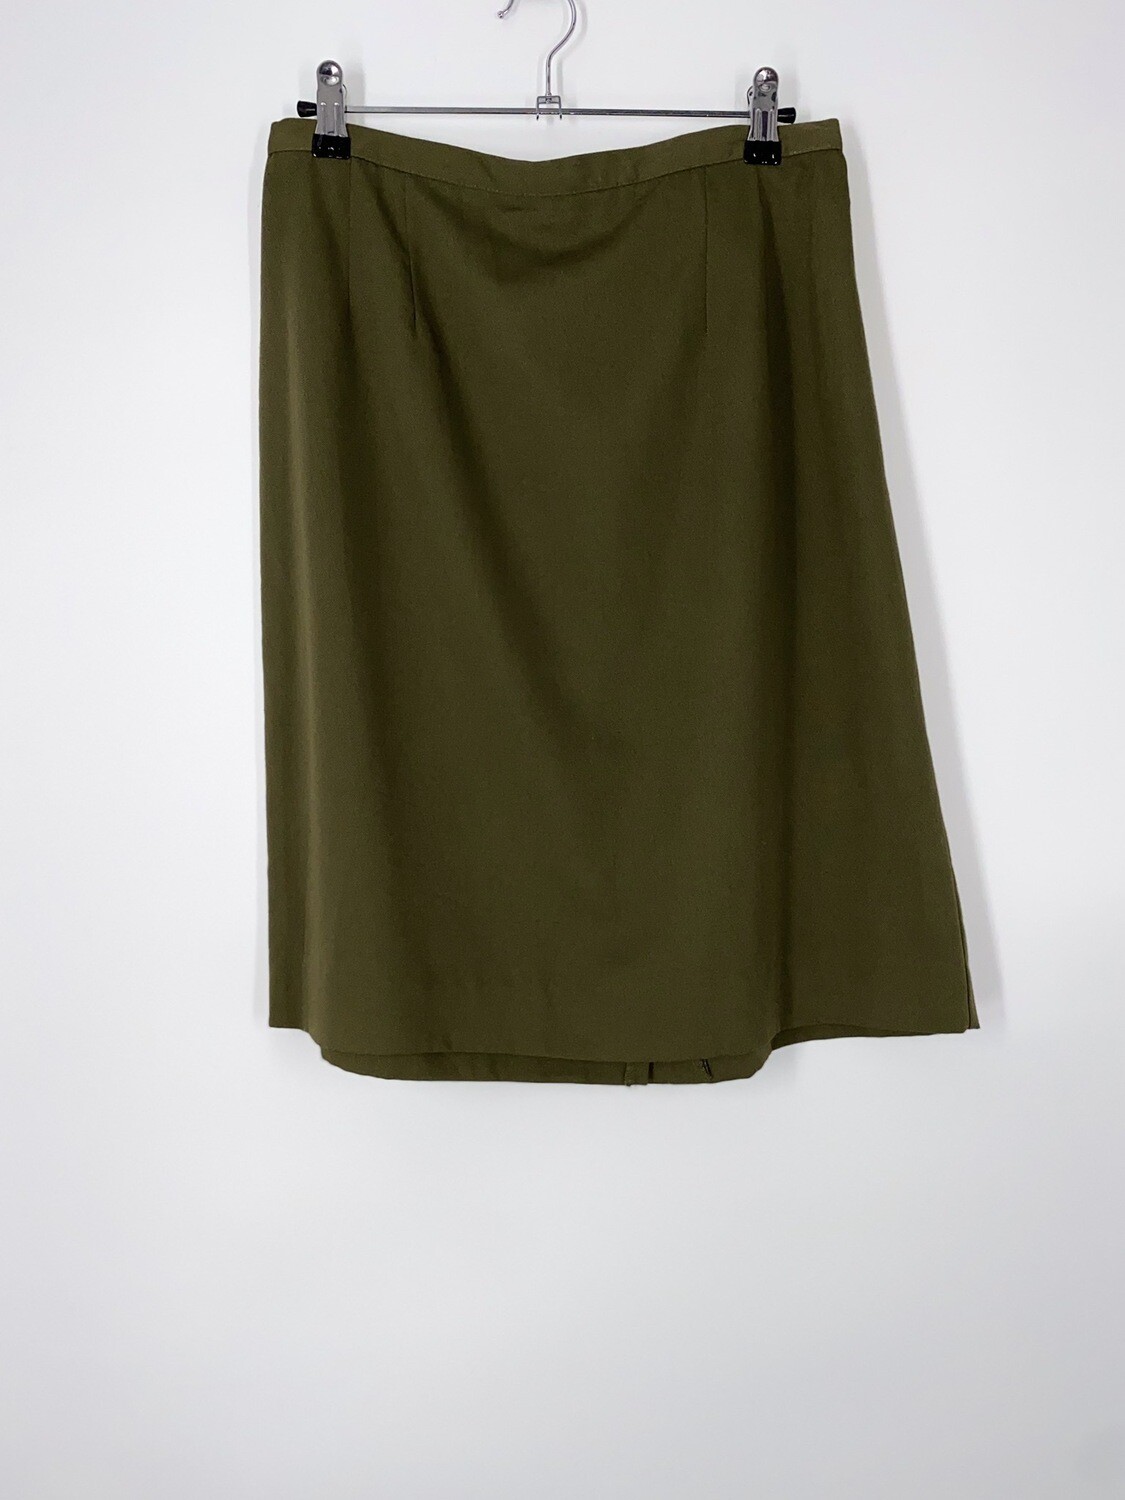 Army Green Skirt Size M